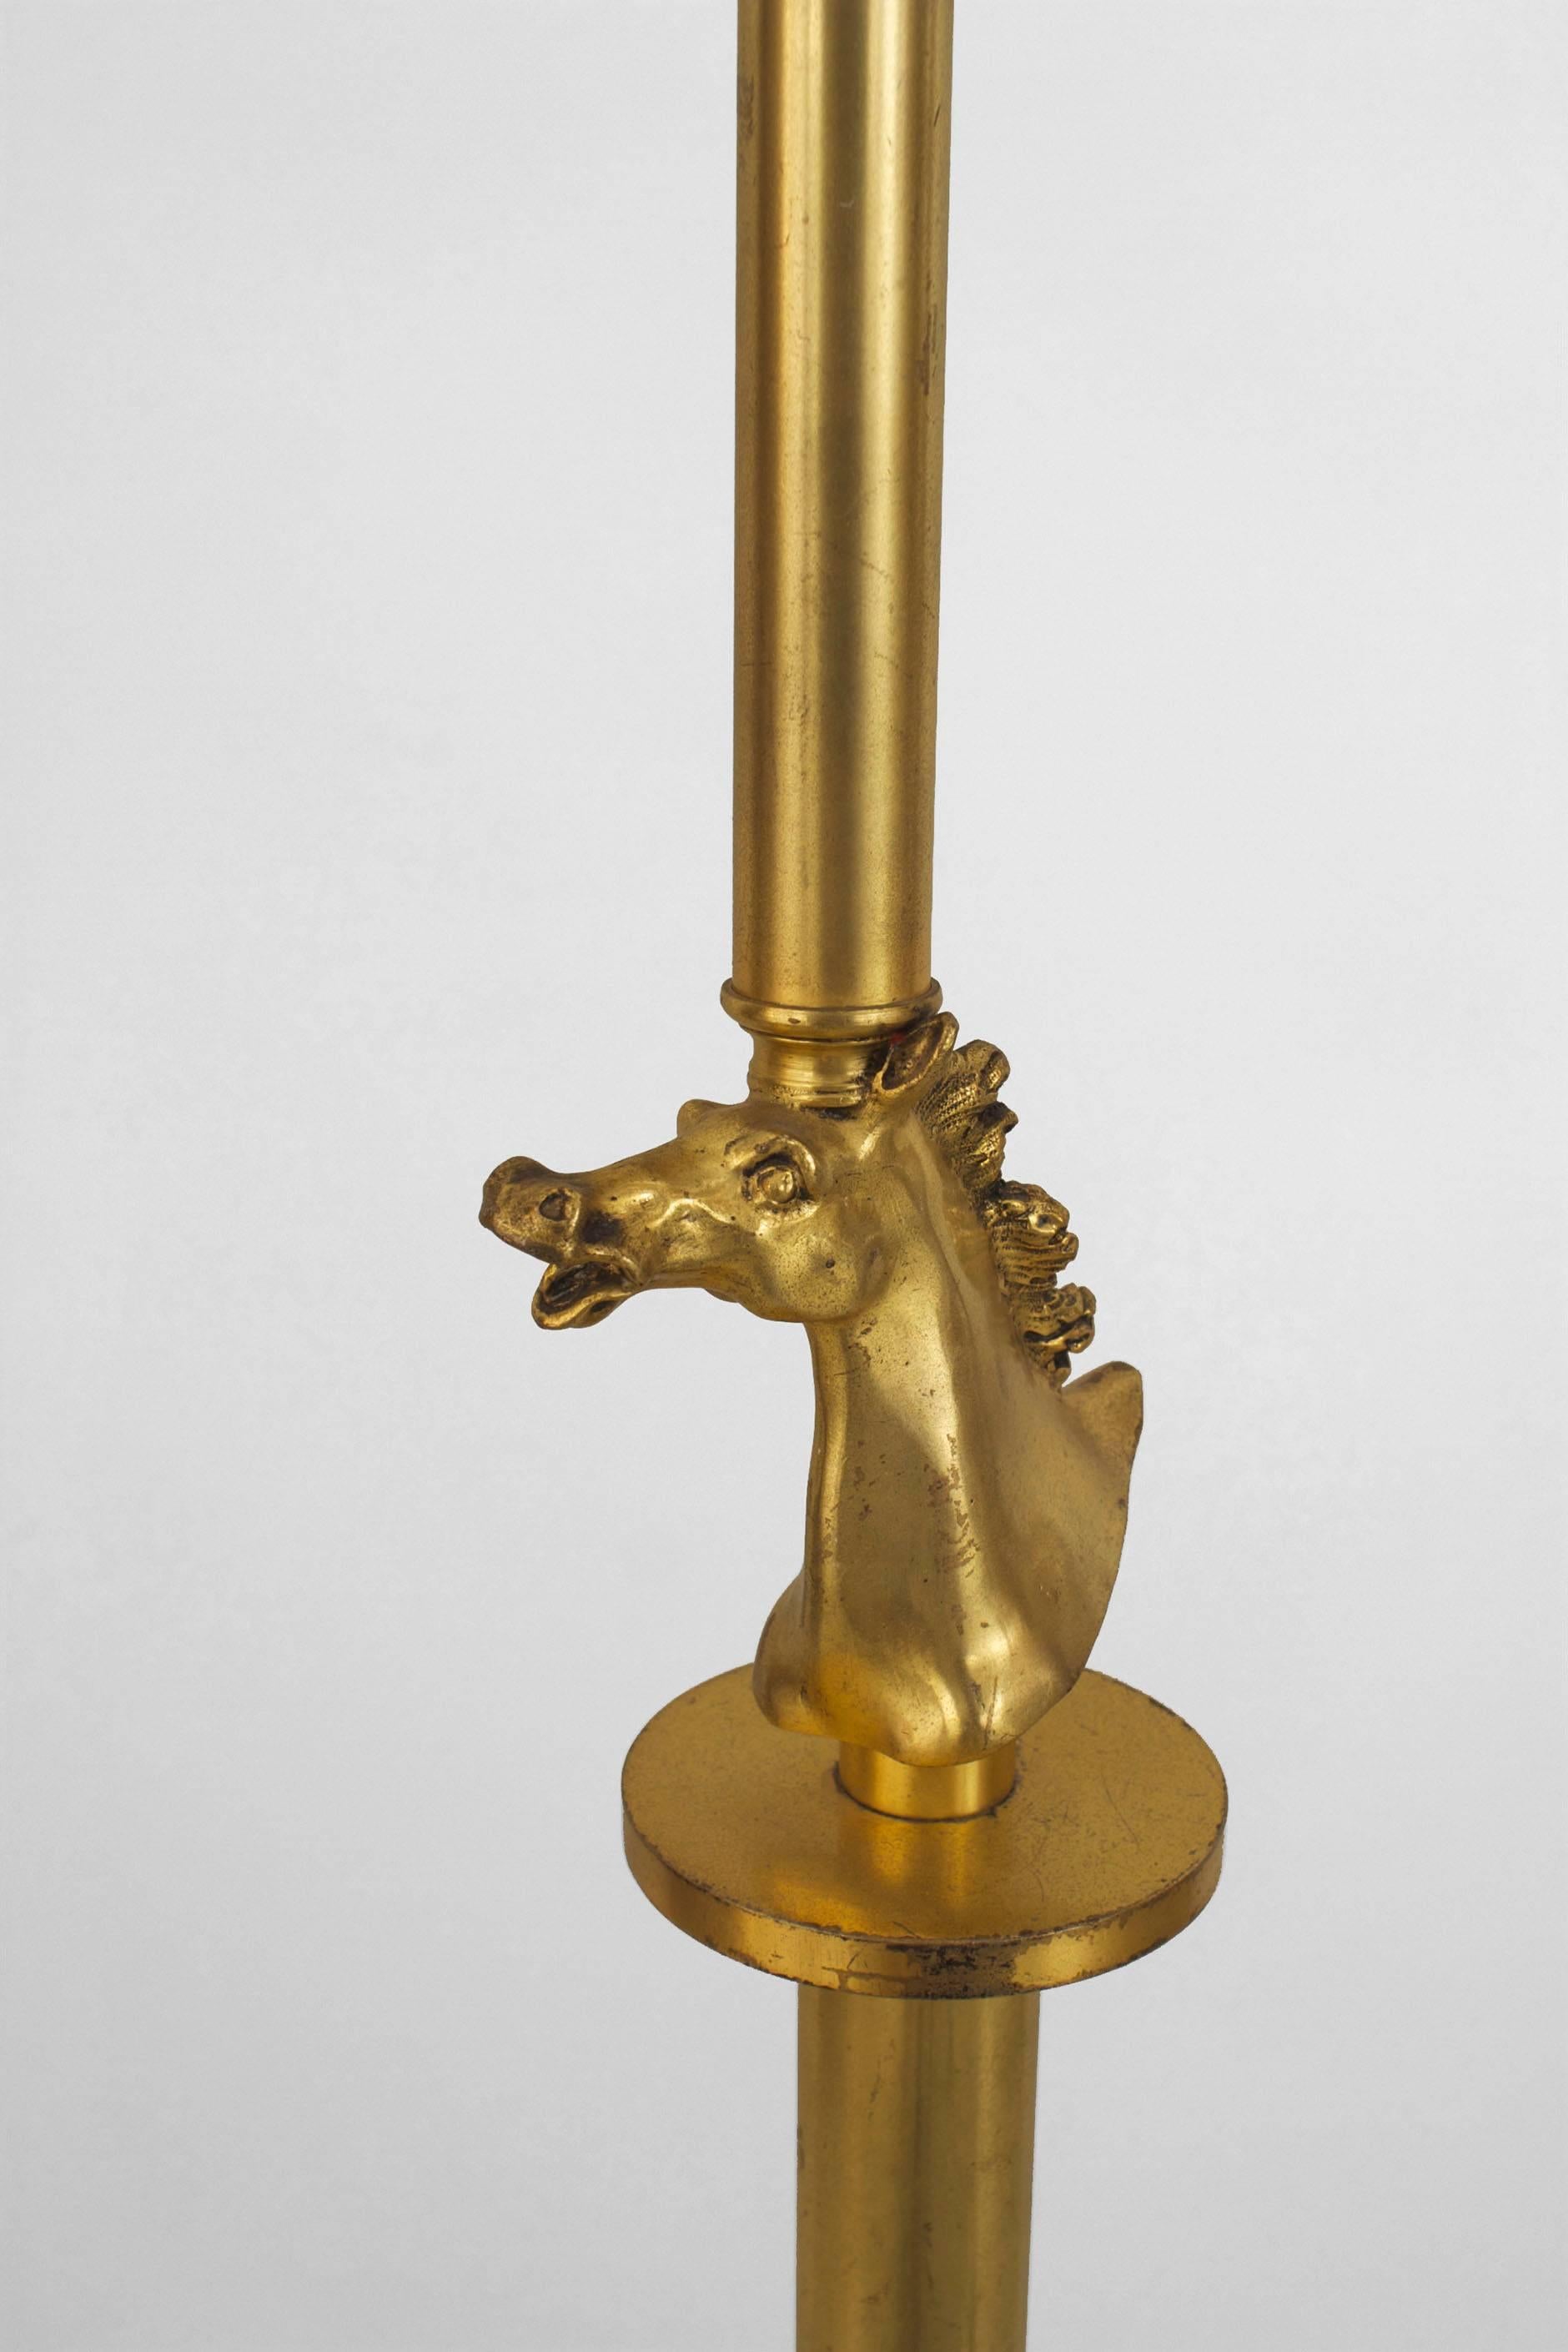 French Art Deco (circa 1930) gilded bronze floor lamp with a centered horse head on a cylindrical shaft and resting on a round brown marble base.
